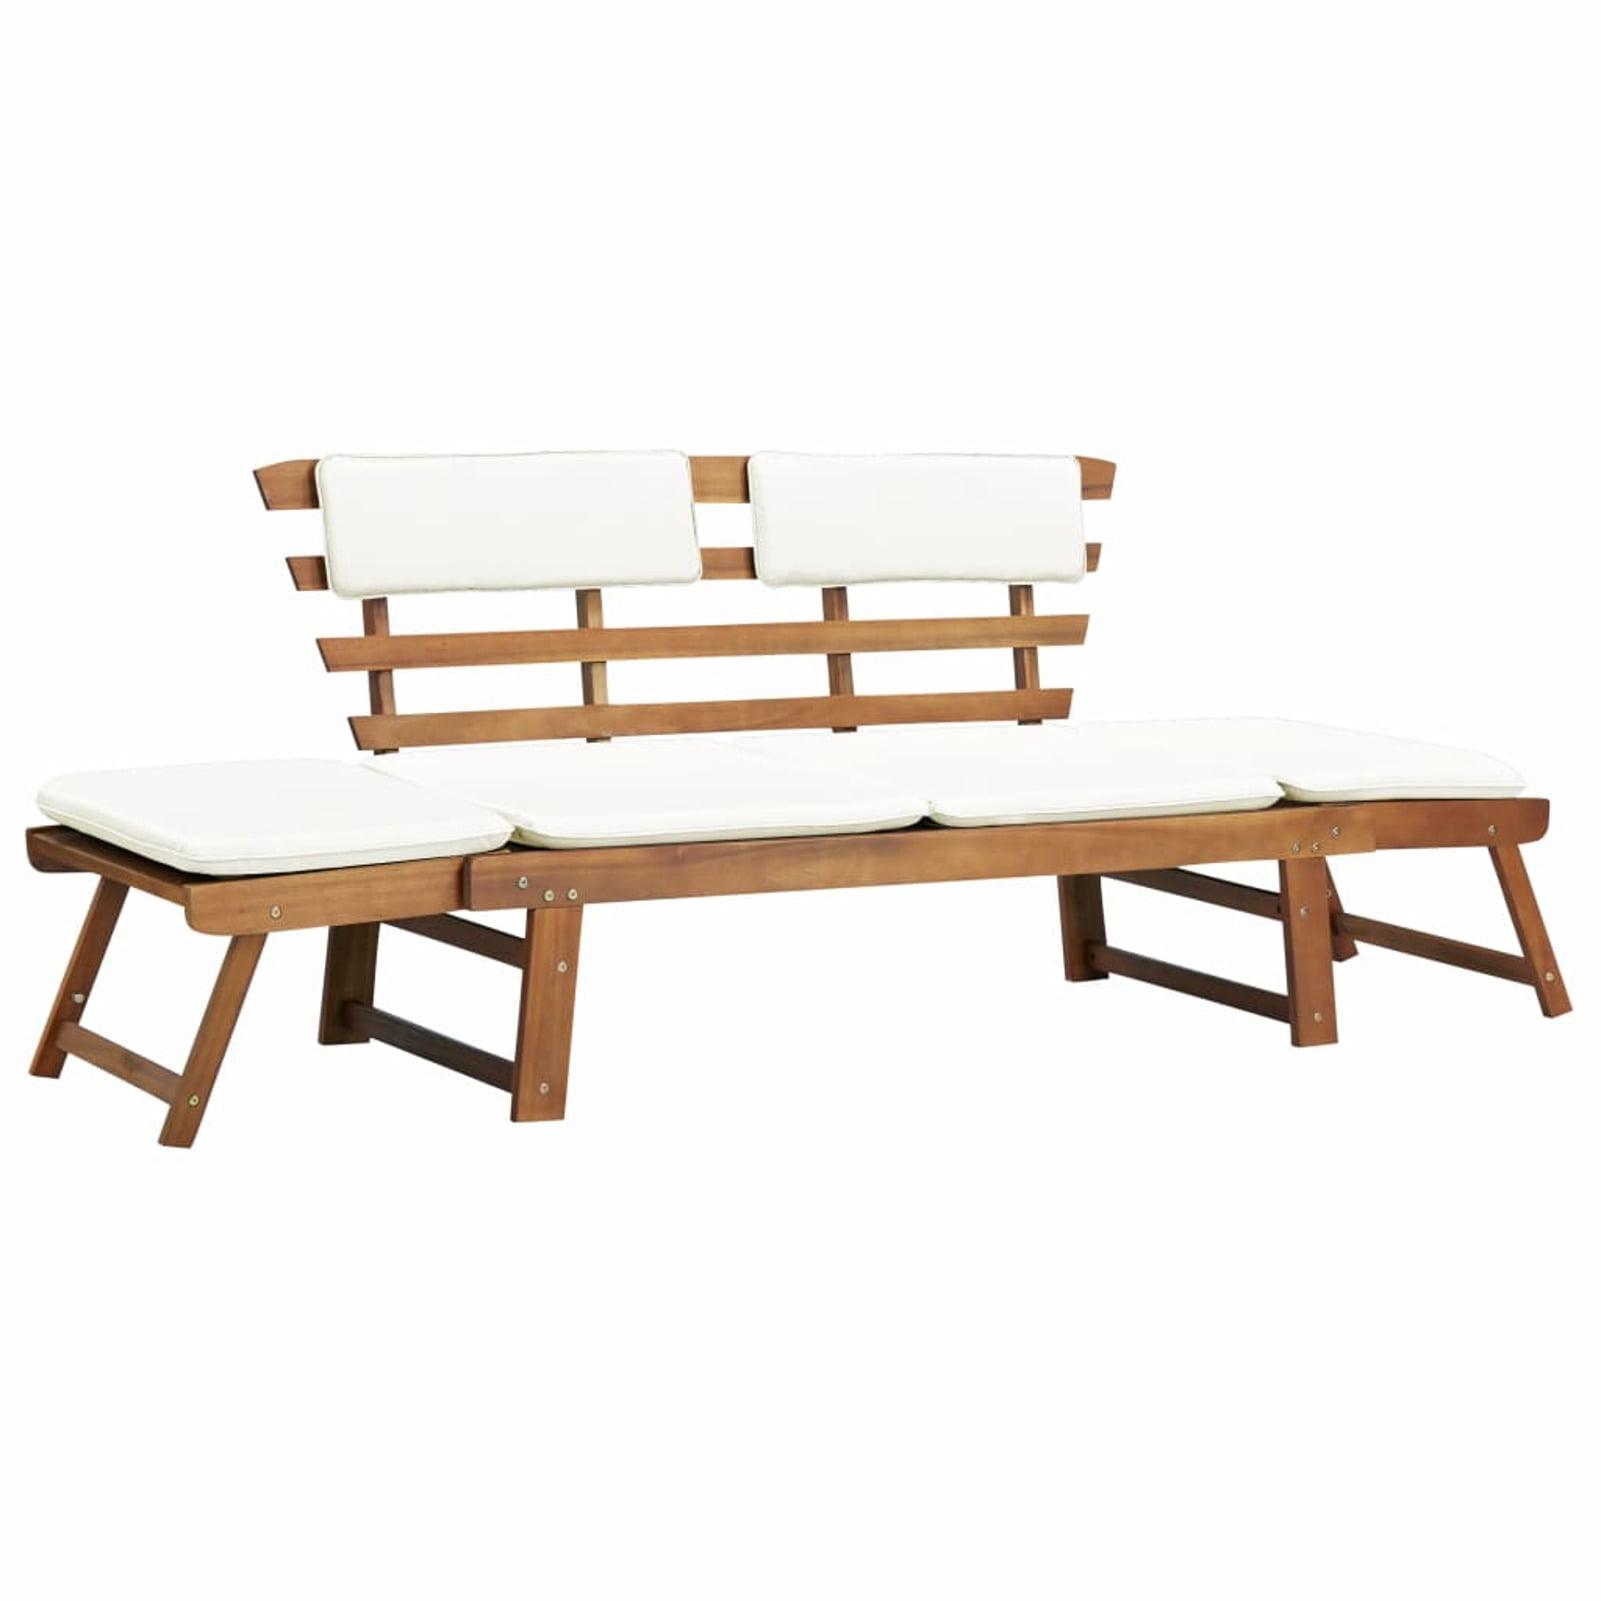 Acacia Wood Convertible Patio Bench-Daybed with Brown and White Cushions